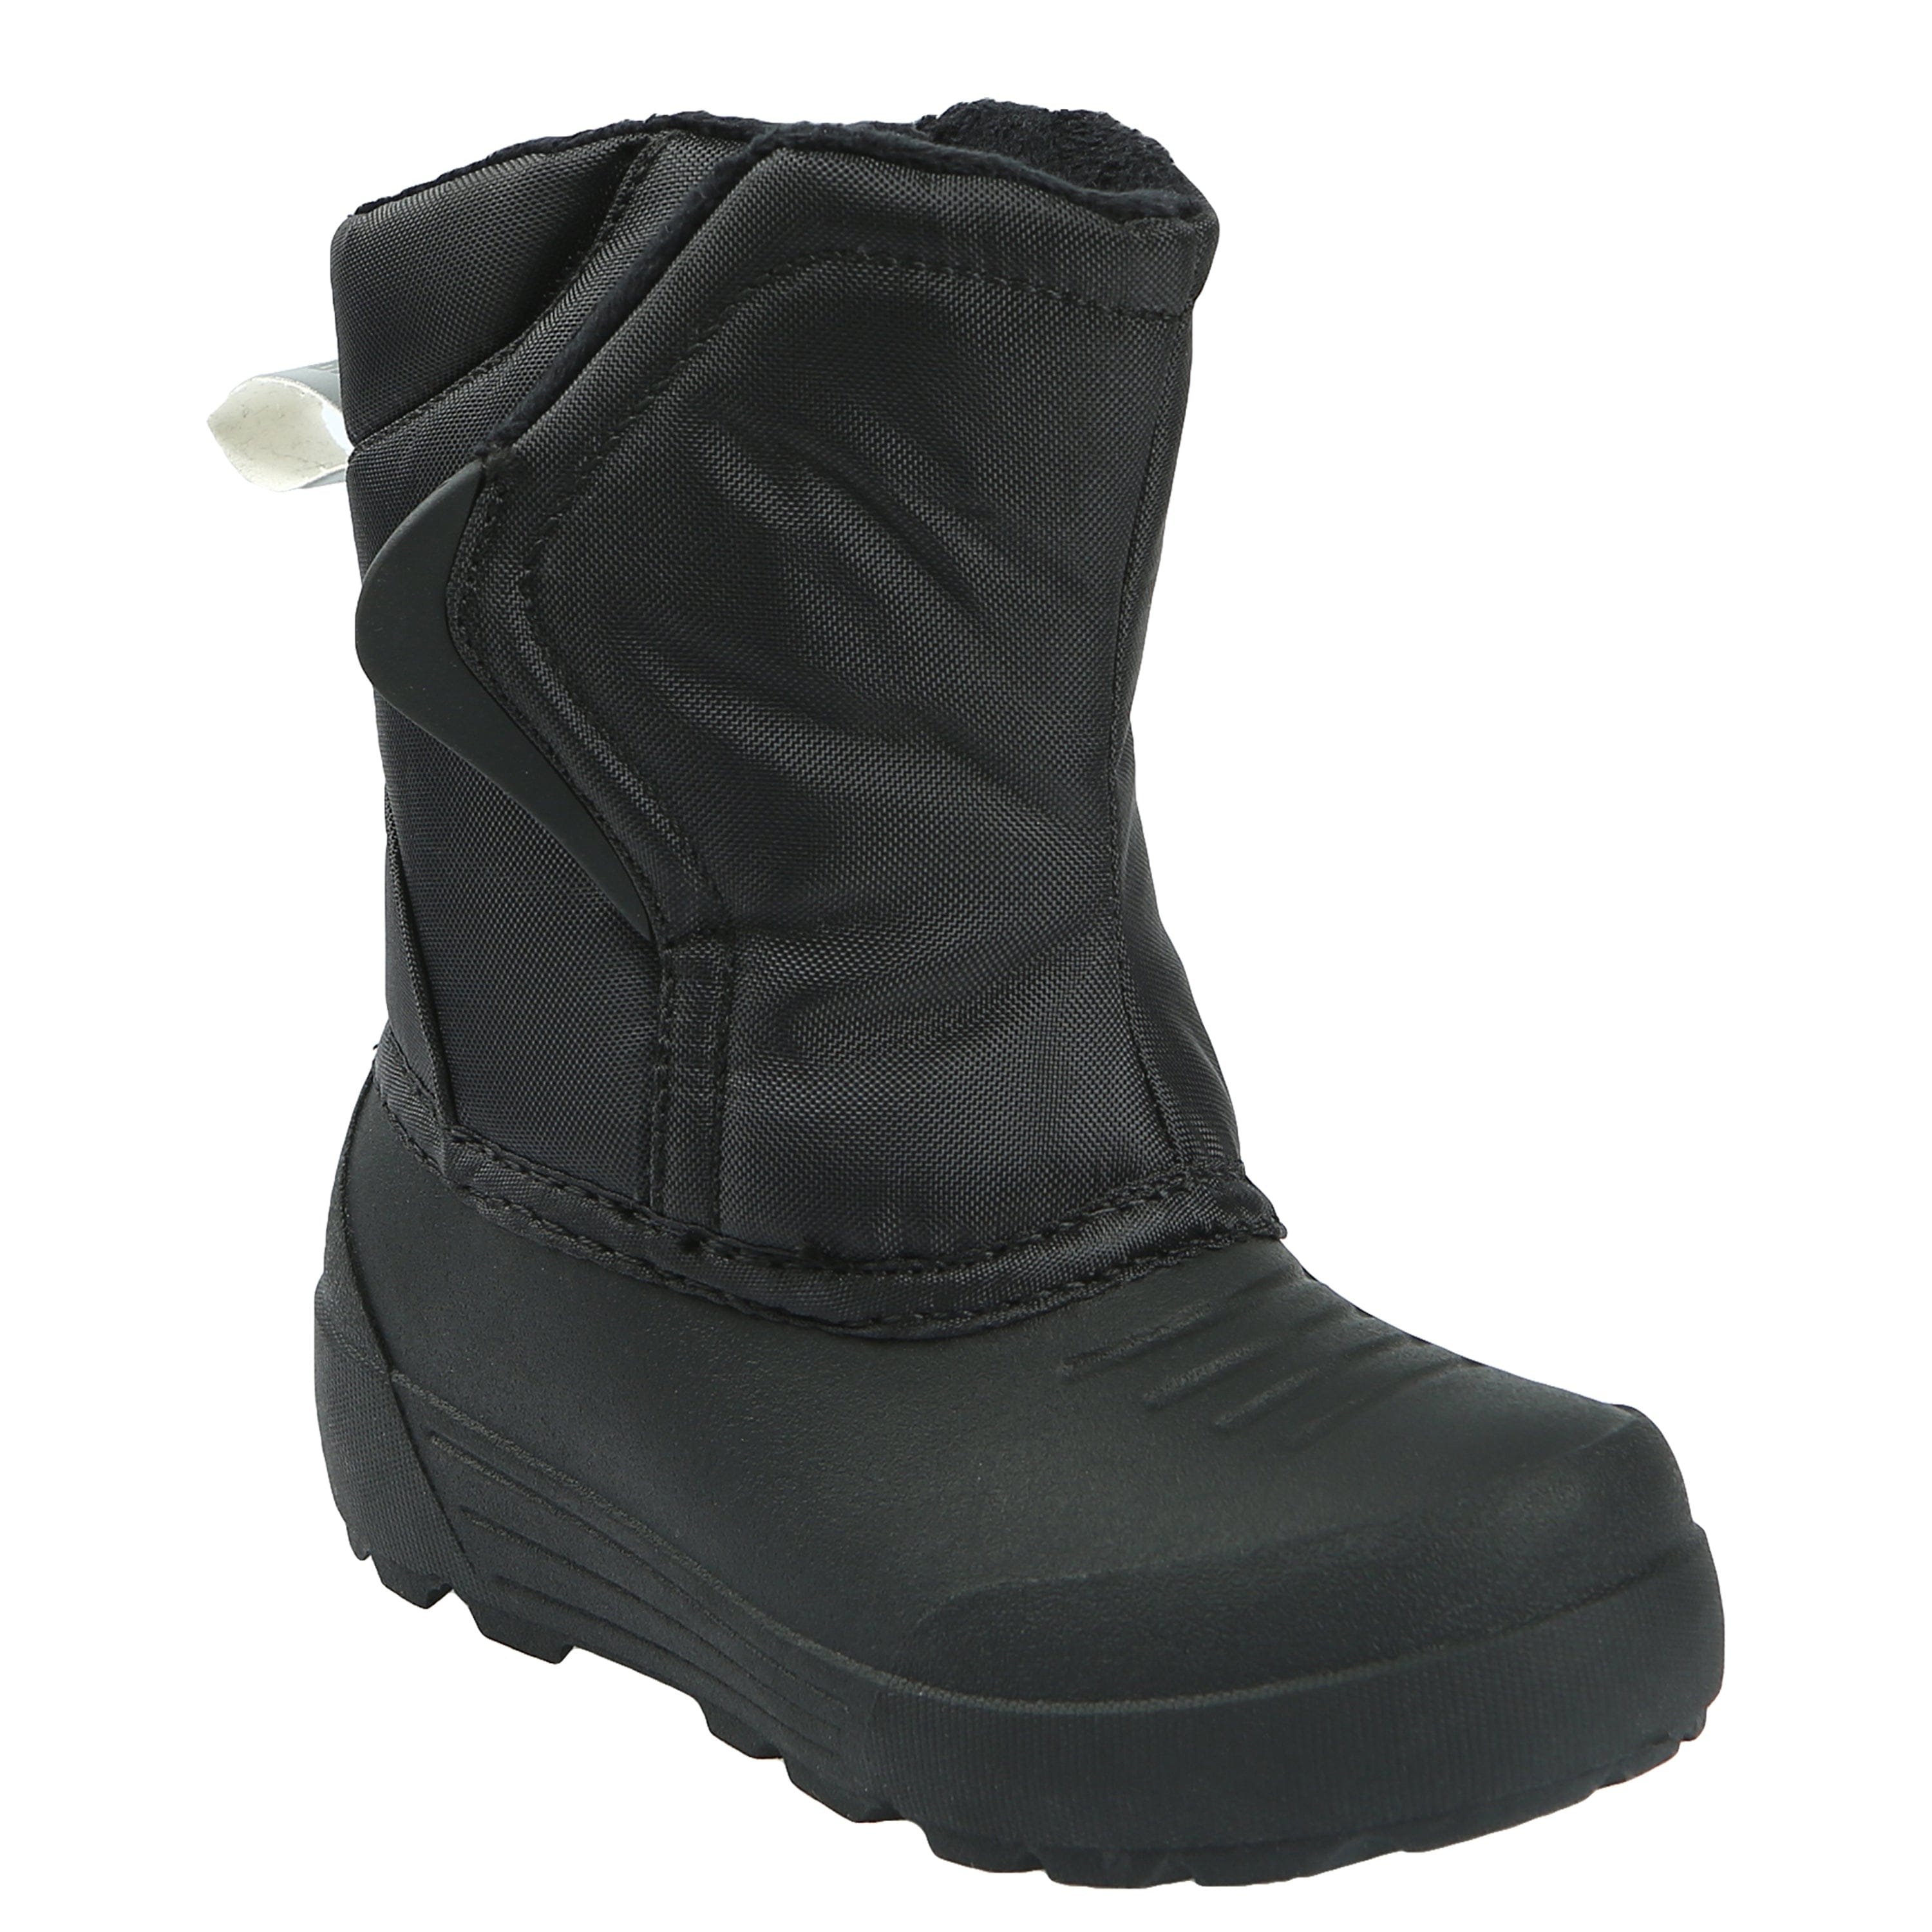 Toddler's Flurrie Insulated Winter Snow Boot - Northside USA